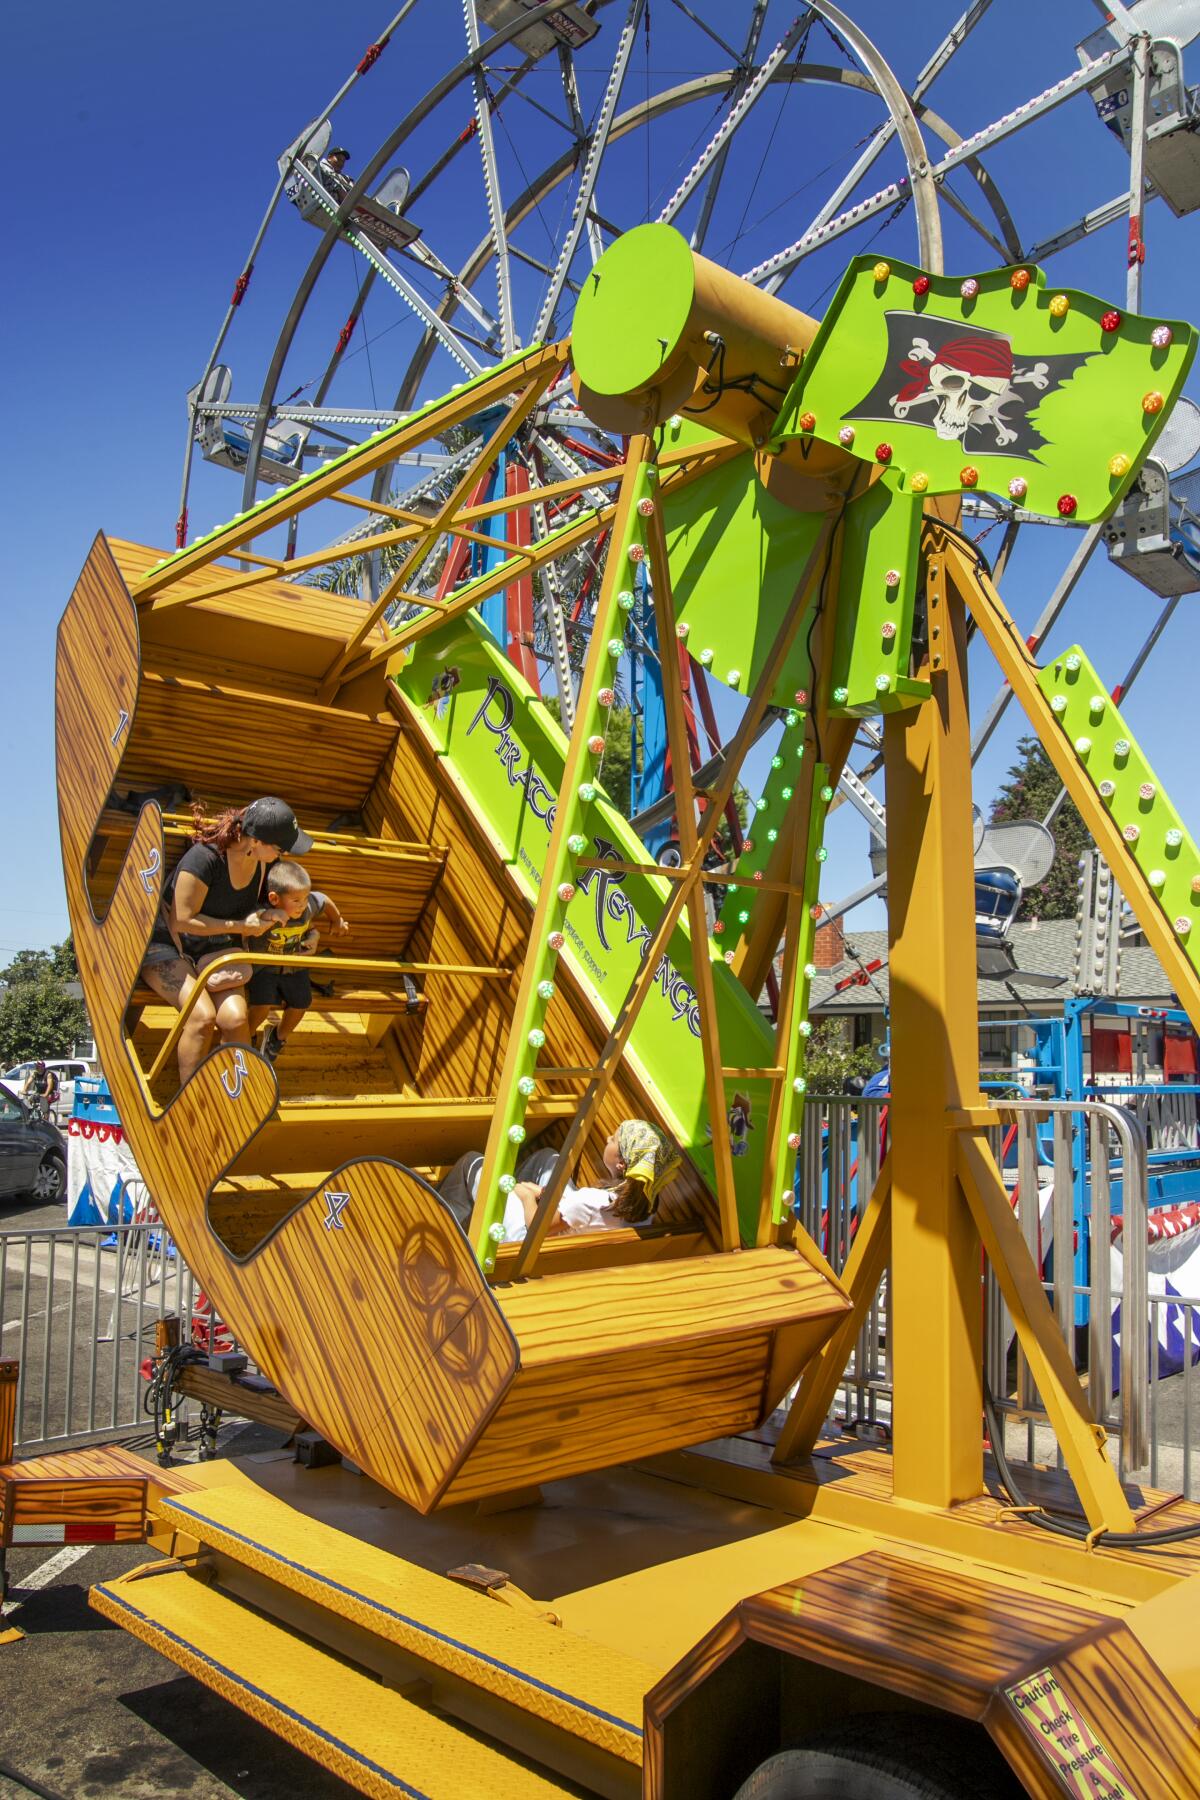 Agueda Bradley and son Milo, 2, ride the Pirates Revenge at the festival.